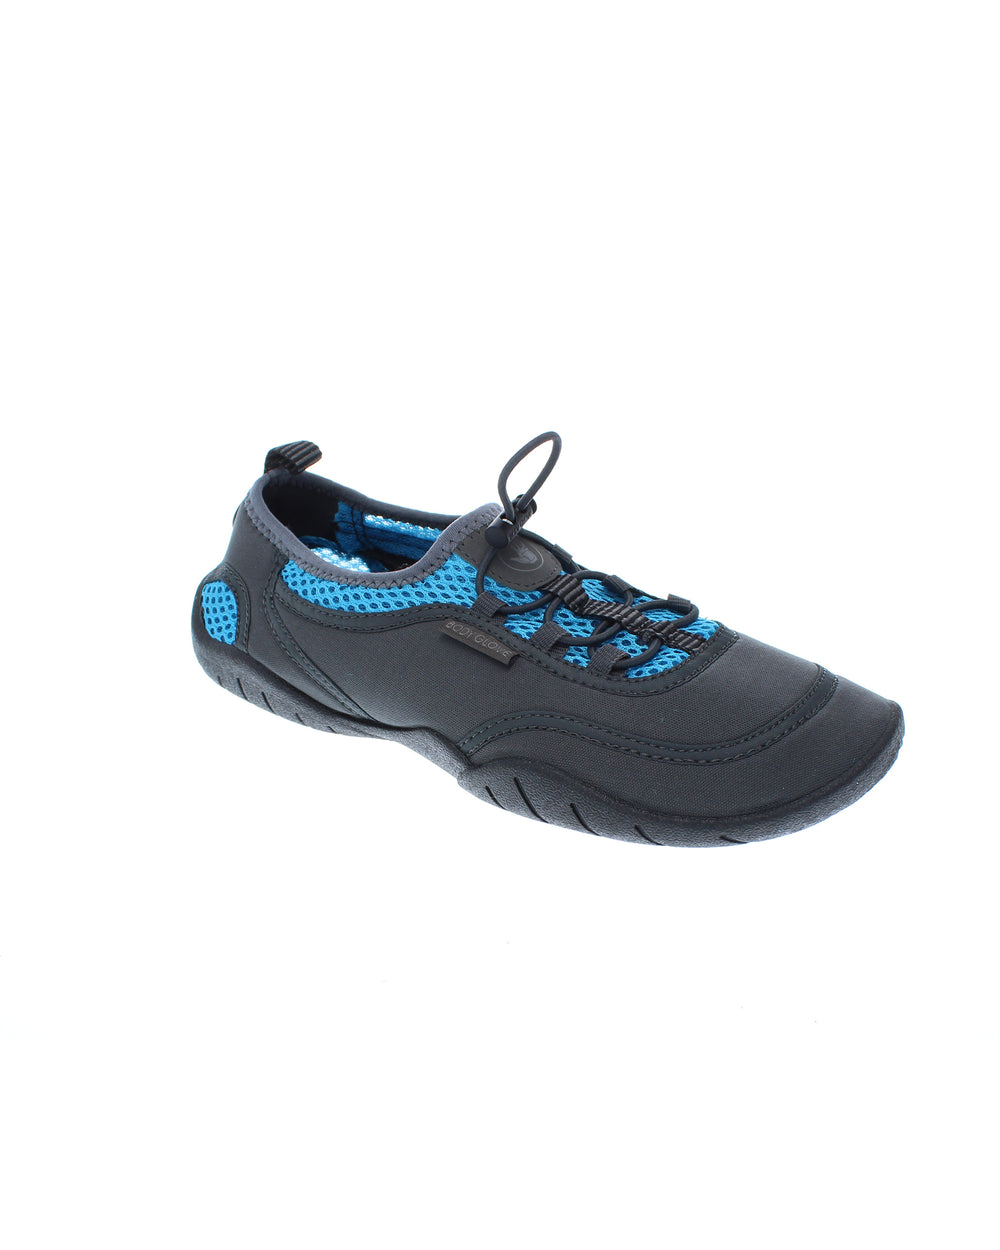 Women's Surge Water Shoes - Charcoal/Poolside Azure